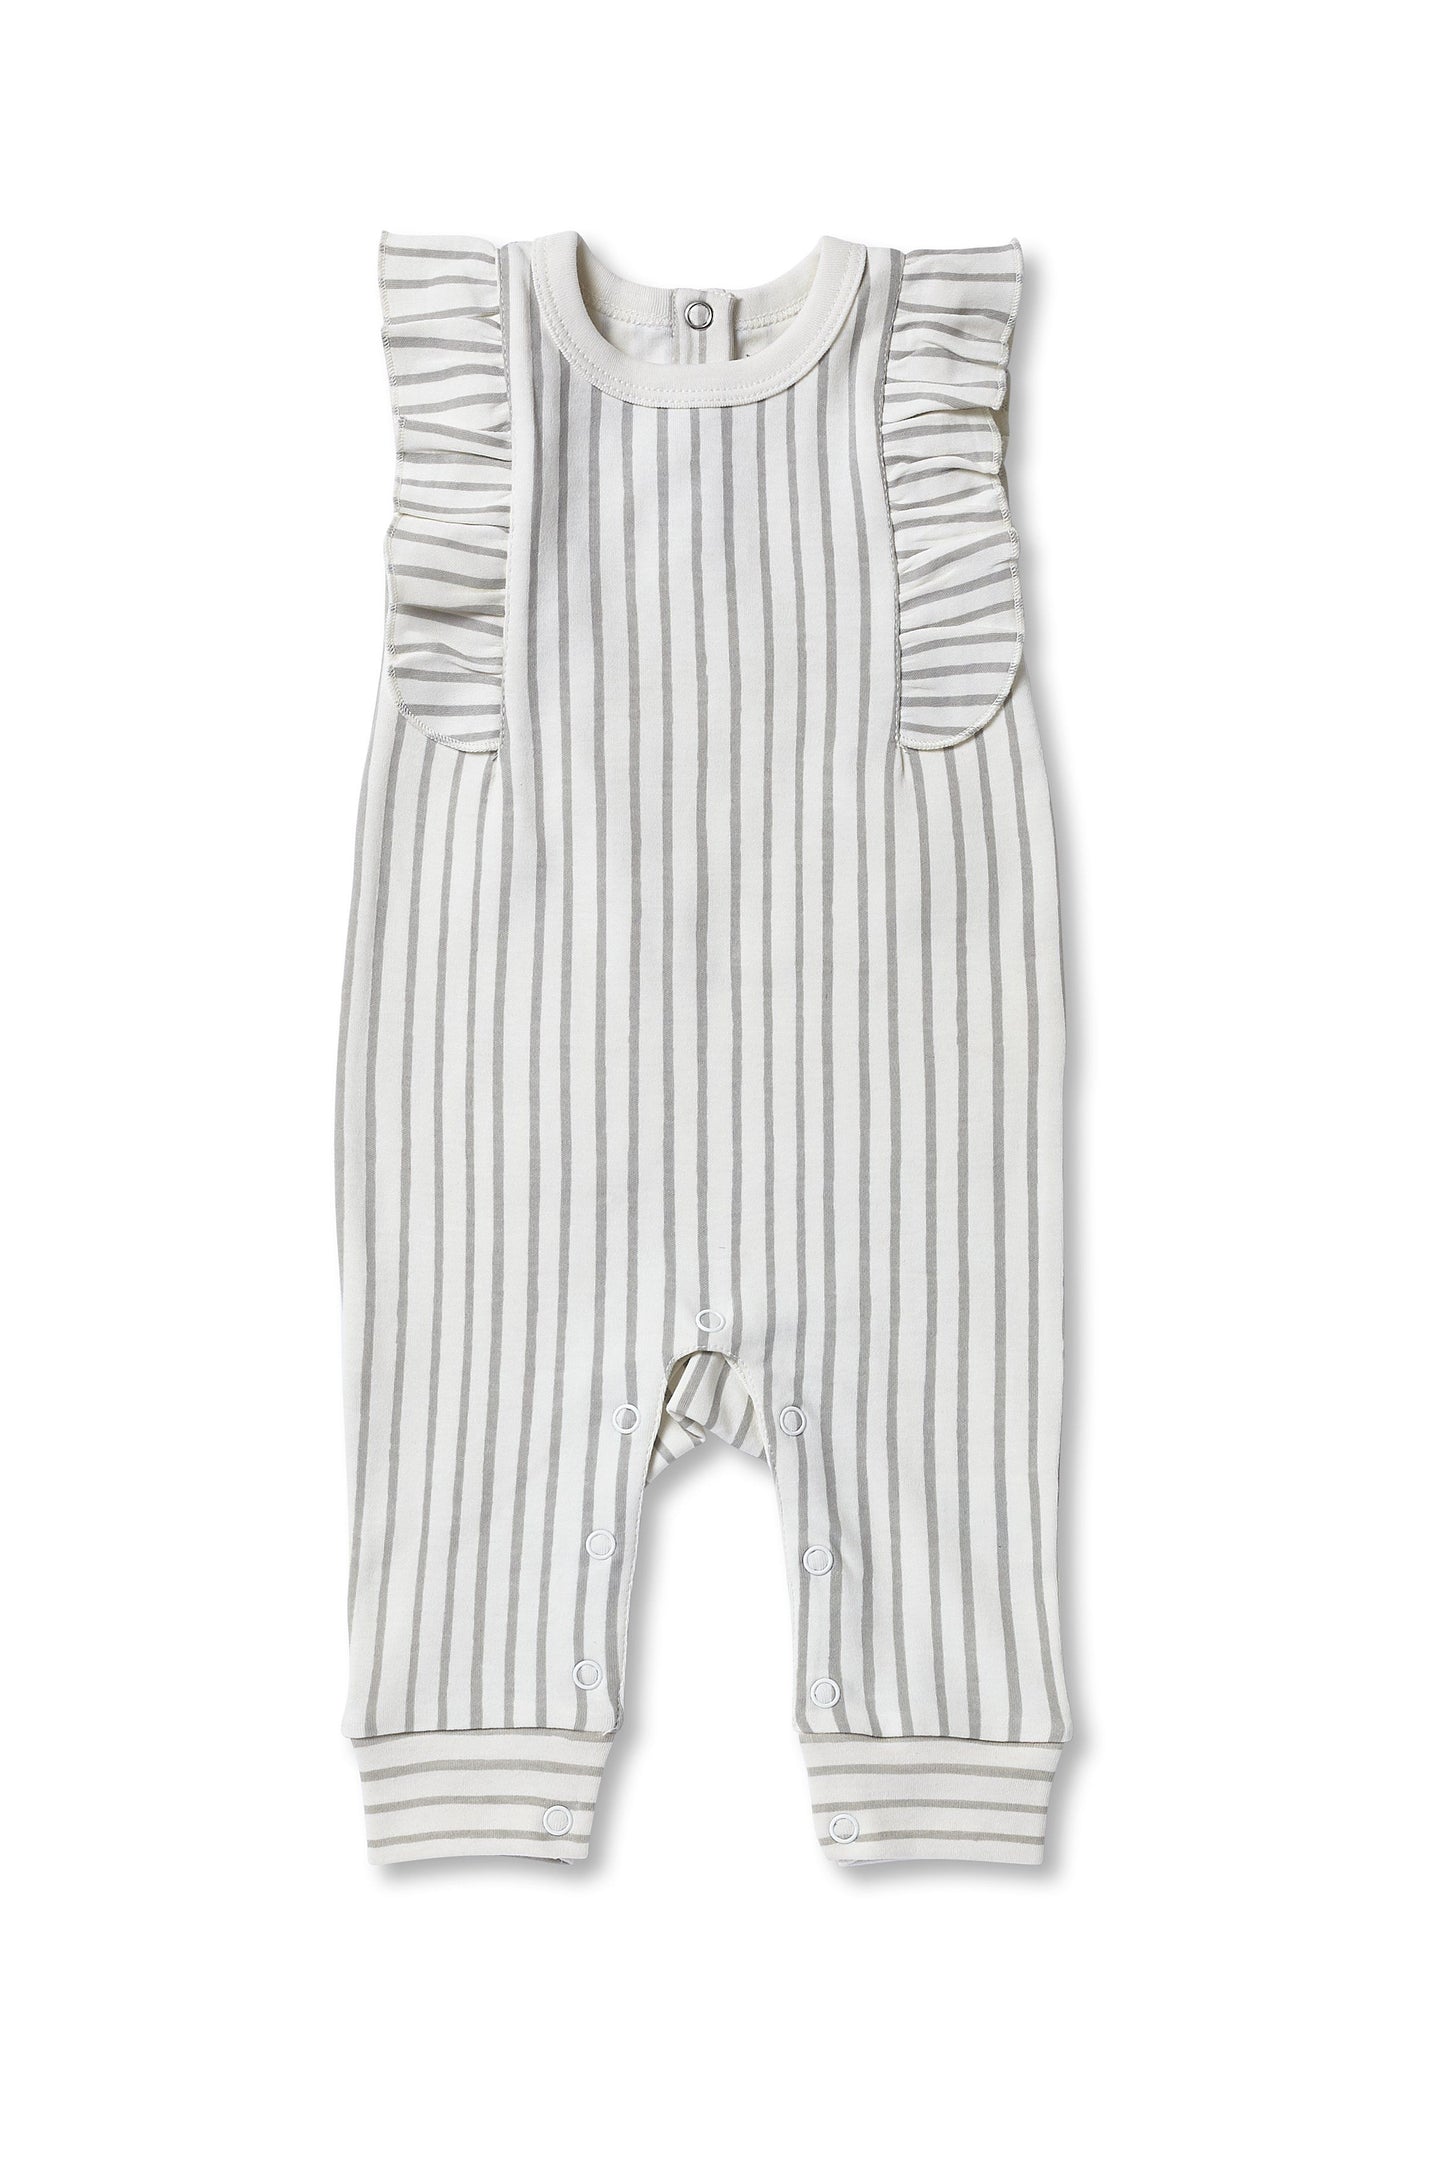 Stripes Away Romper with Ruffle - Pebble Gray